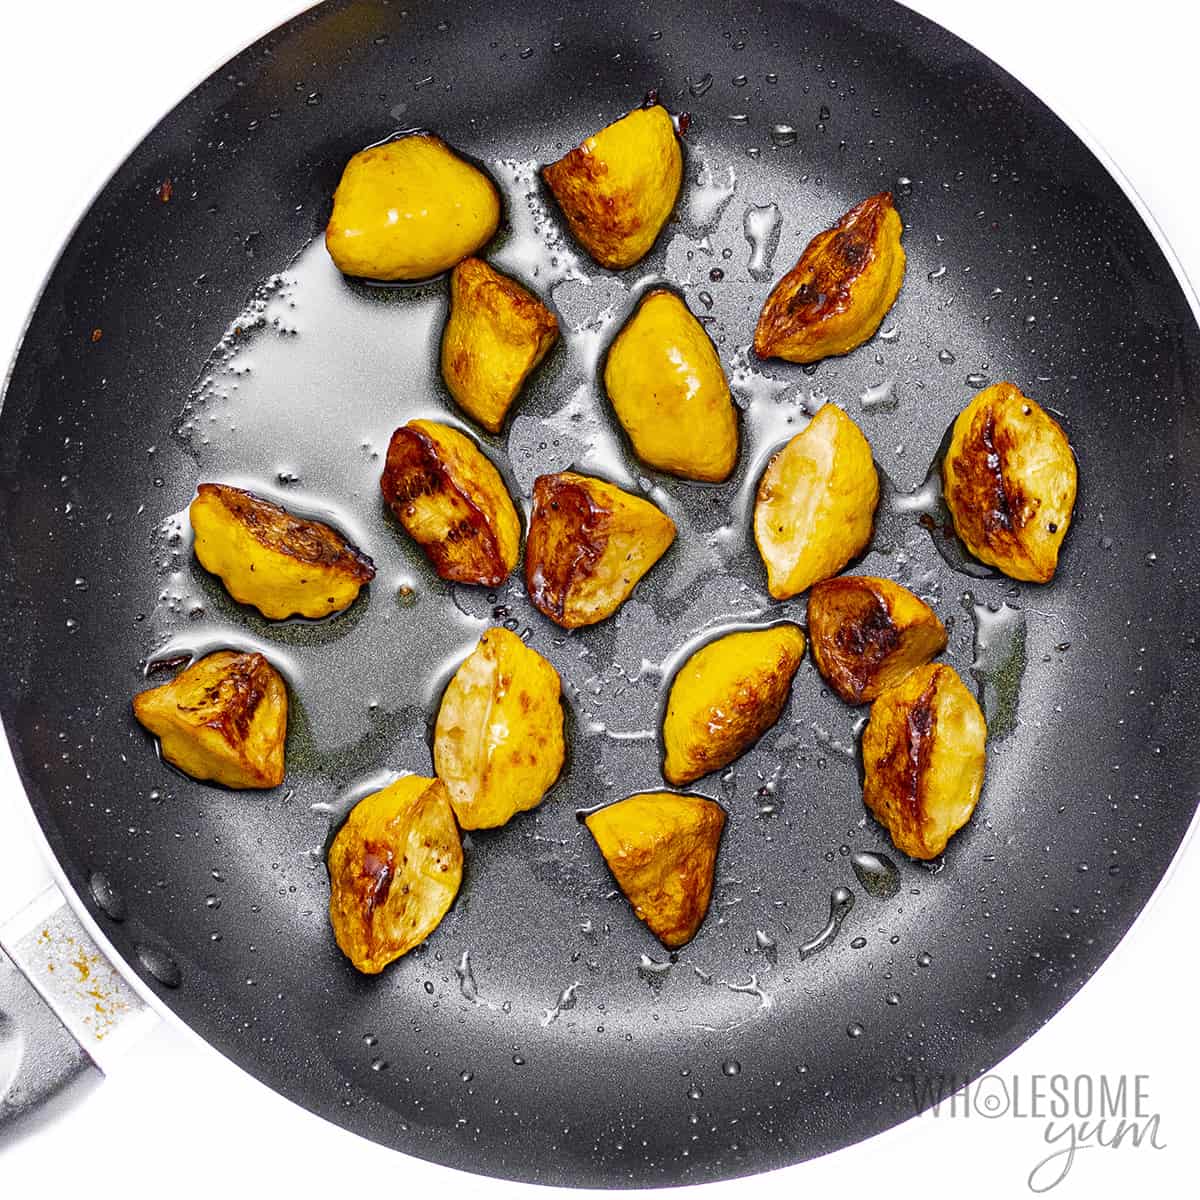 Fully cooked and sauteed patty pan squash recipe in skillet.